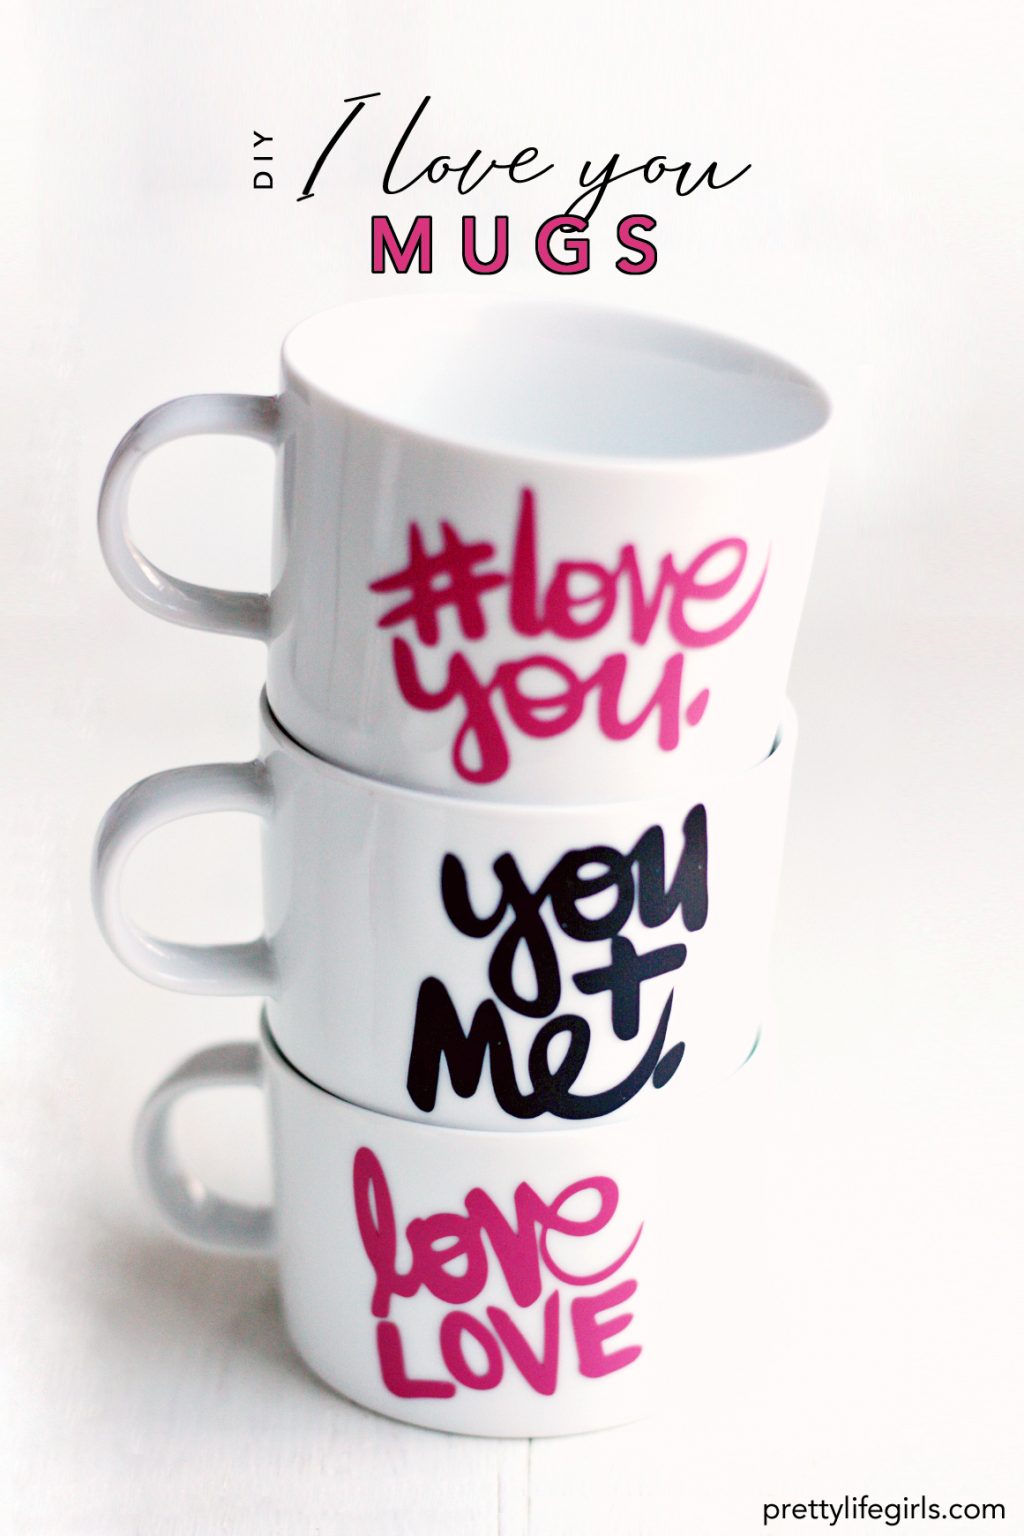 15 Lovely Handmade Valentine Gifts + featured by Top US Craft Blog + The Pretty Life Girls: + DIY I Love You Mugs